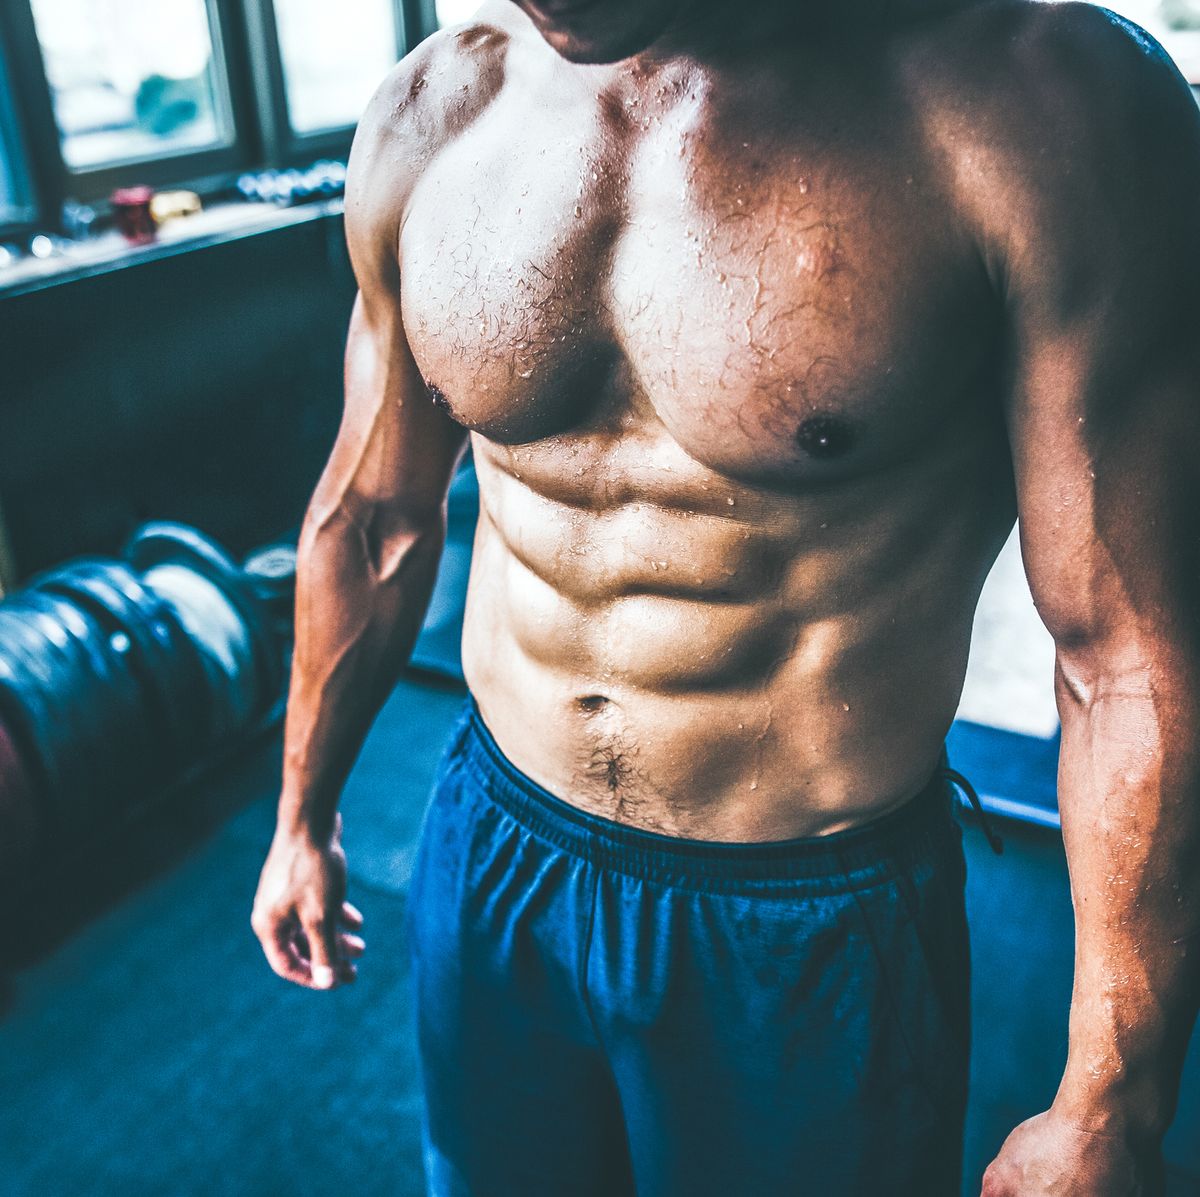 HOW TO STRUCTURE THE PERFECT ABS WORKOUT